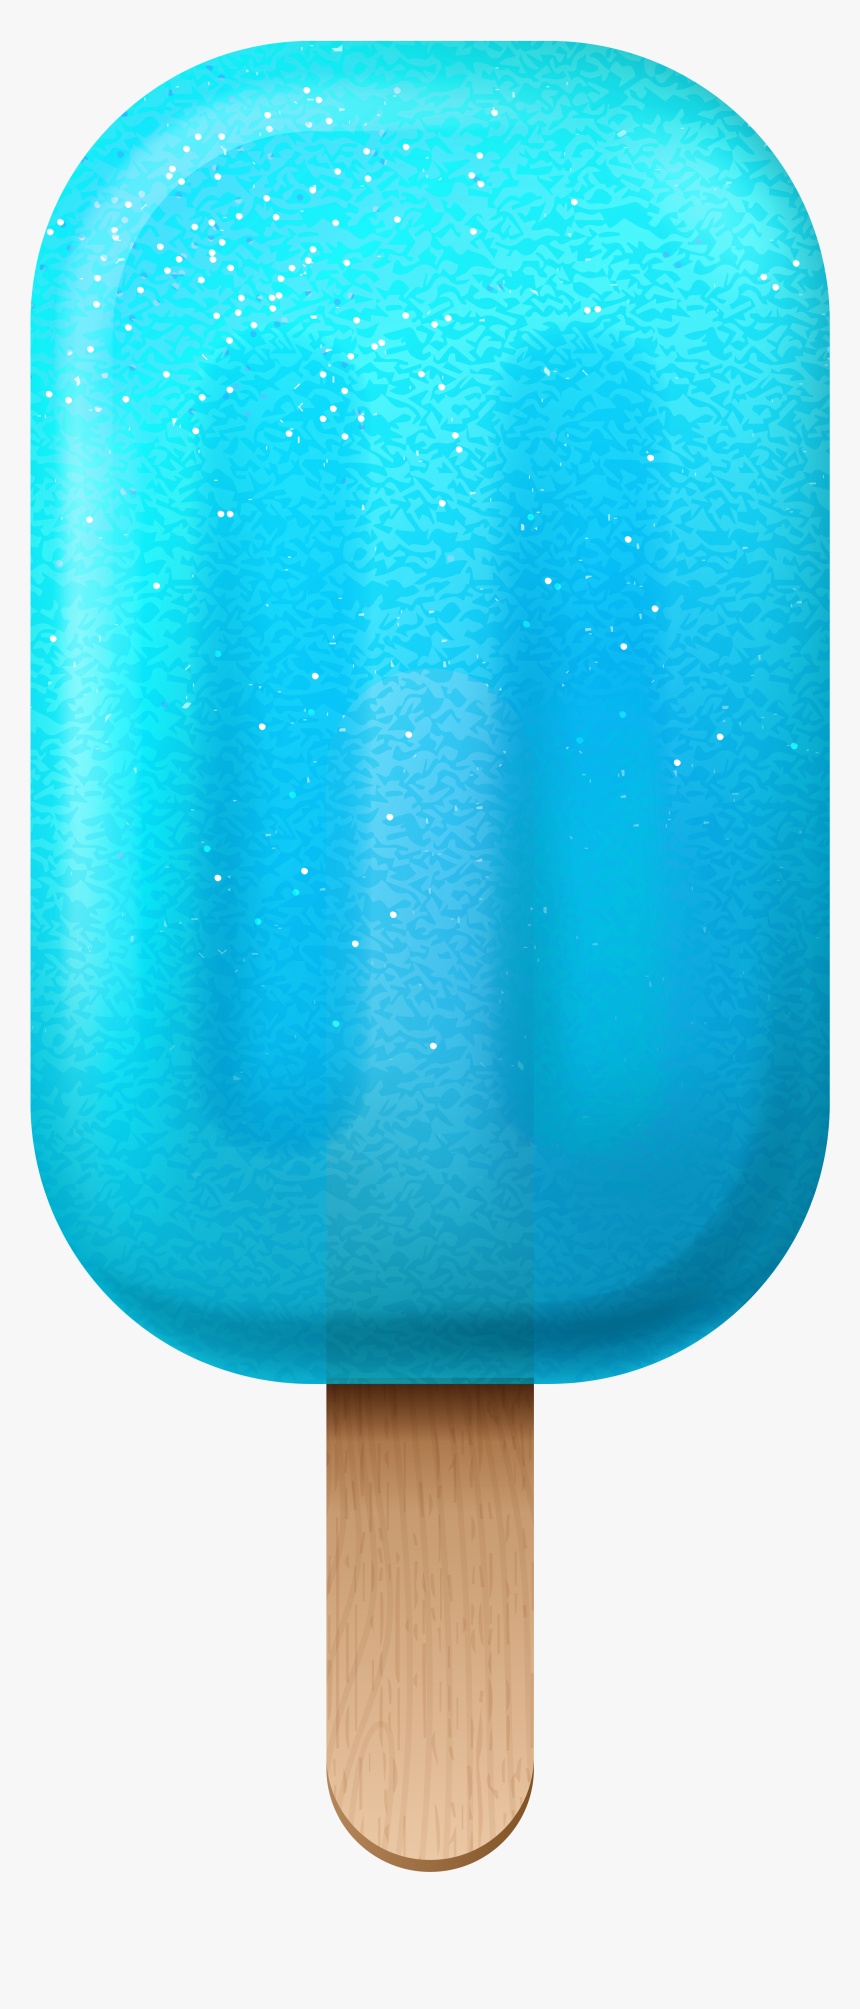 Blue Ice Cream Png Clipart Image - Blue Ice Cream Clipart, Transparent Png, Free Download